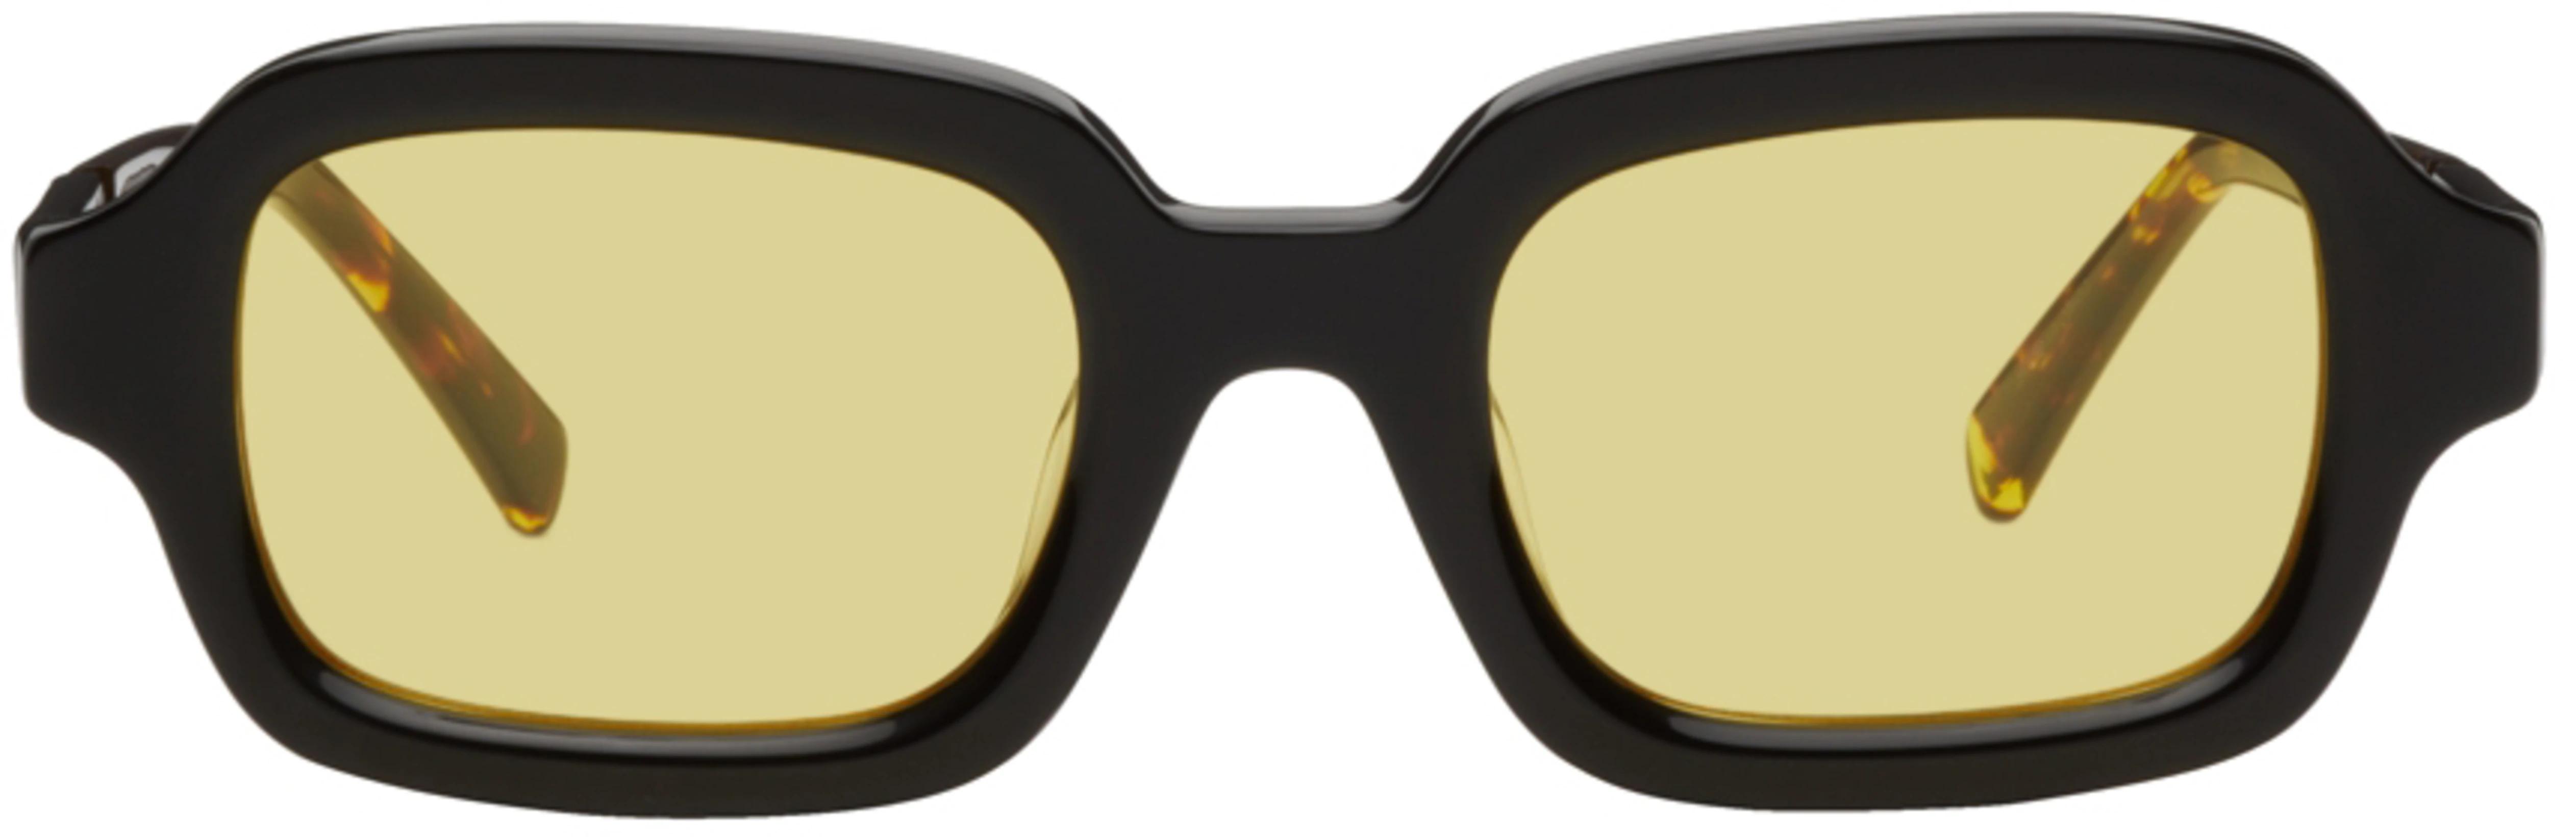 Black & Yellow Shy Guy Sunglasses by BONNIE CLYDE